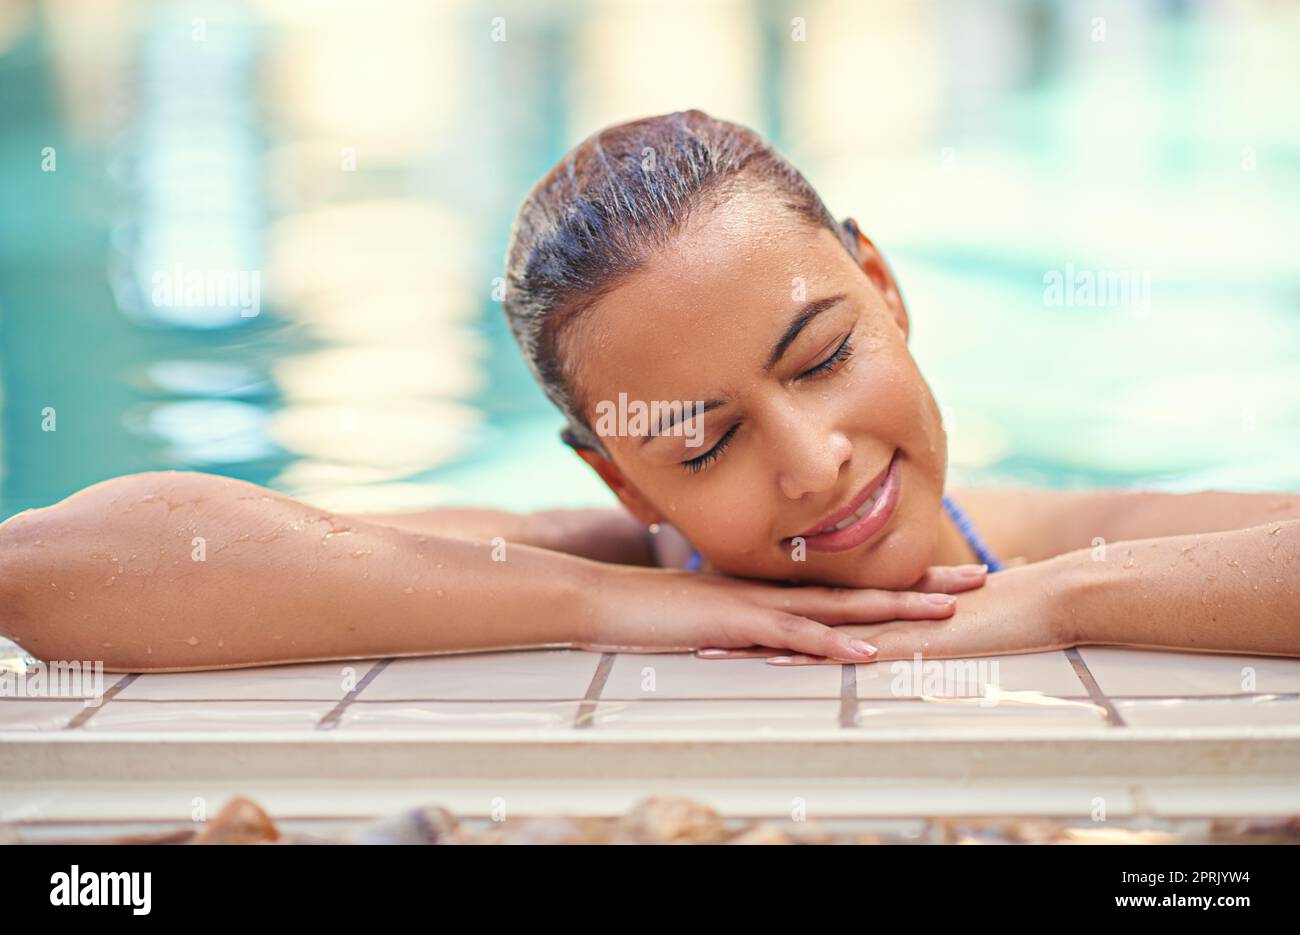 Swim your worries away. a young woman relaxing in the pool at a spa. Stock Photo